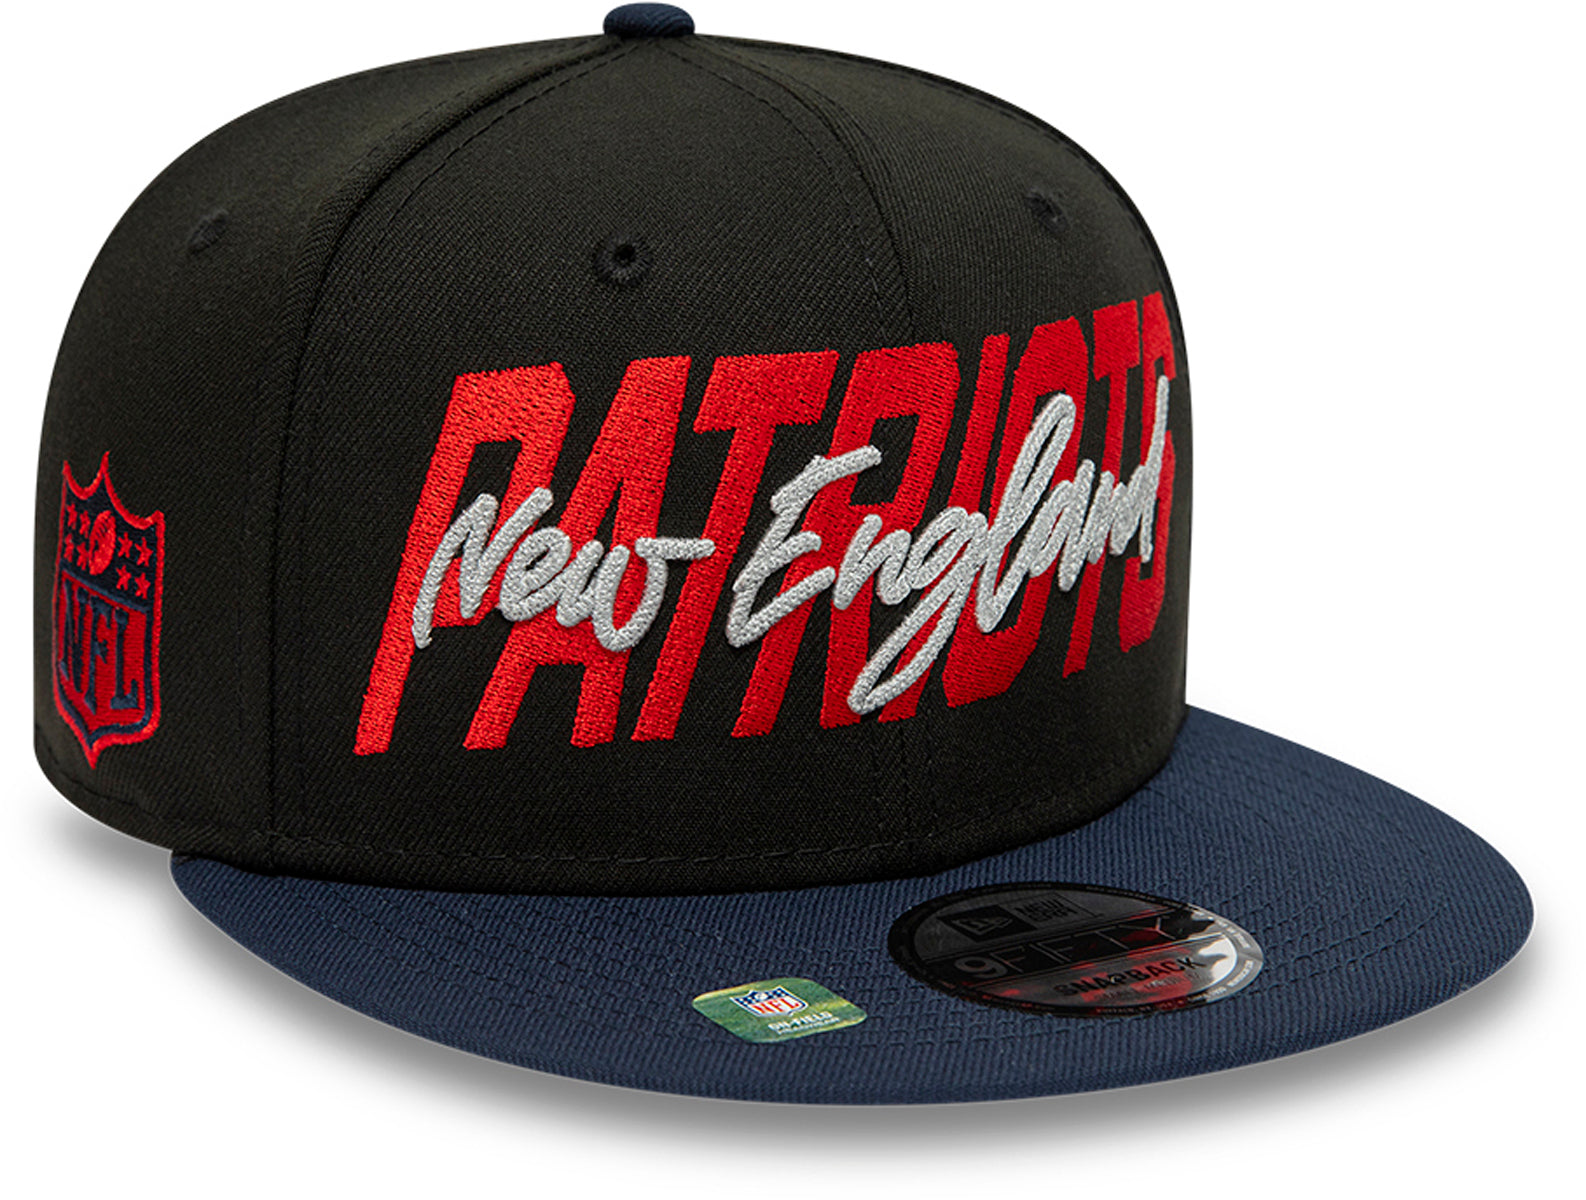 Headwear  NBA, NFL, Esports Snapbacks, Fitted, and Knitted Hats